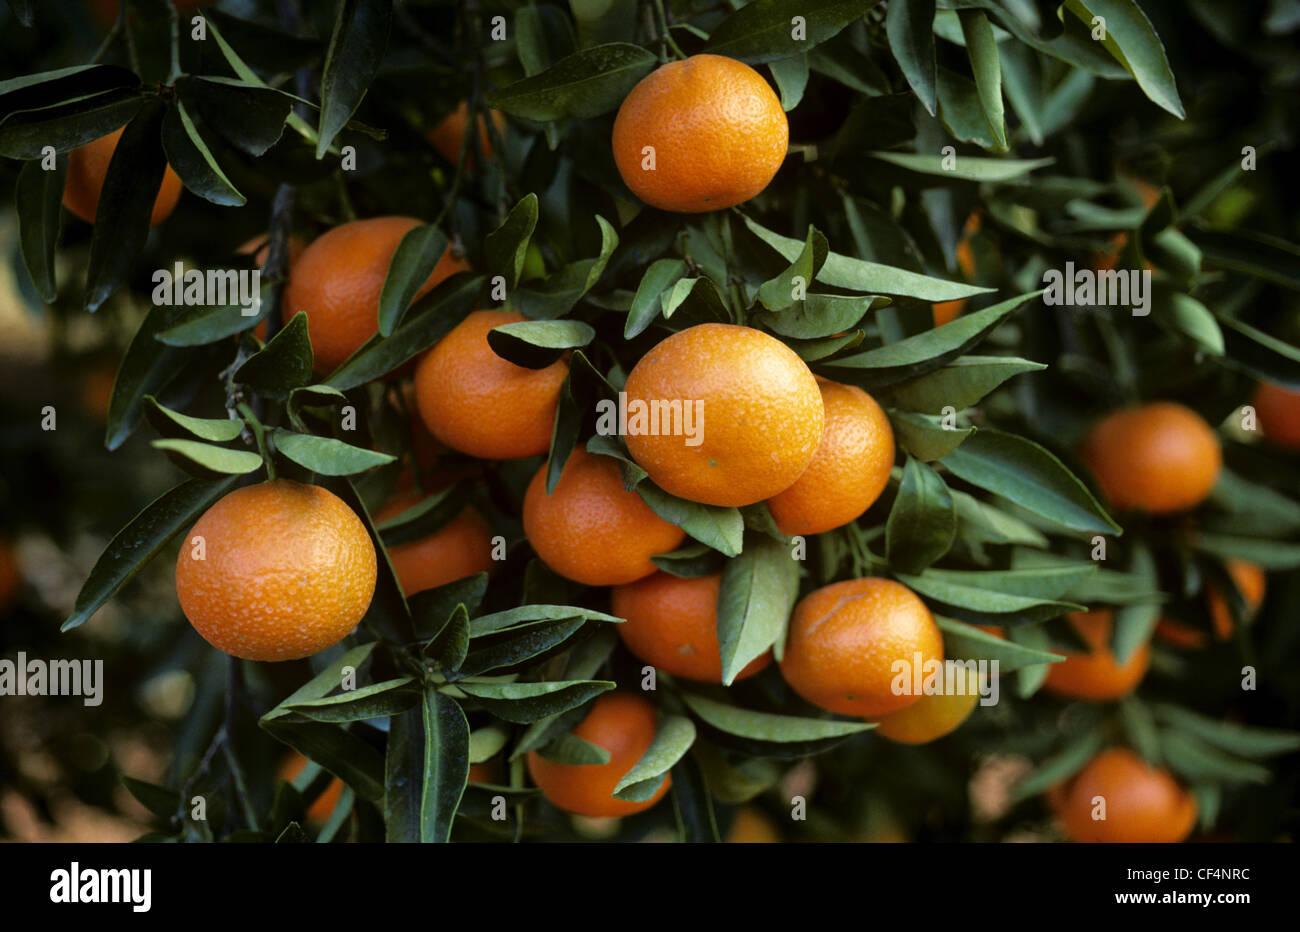 Clementine (Citrus reticulata) fruit on the trees near Valencia, Spain Stock Photo